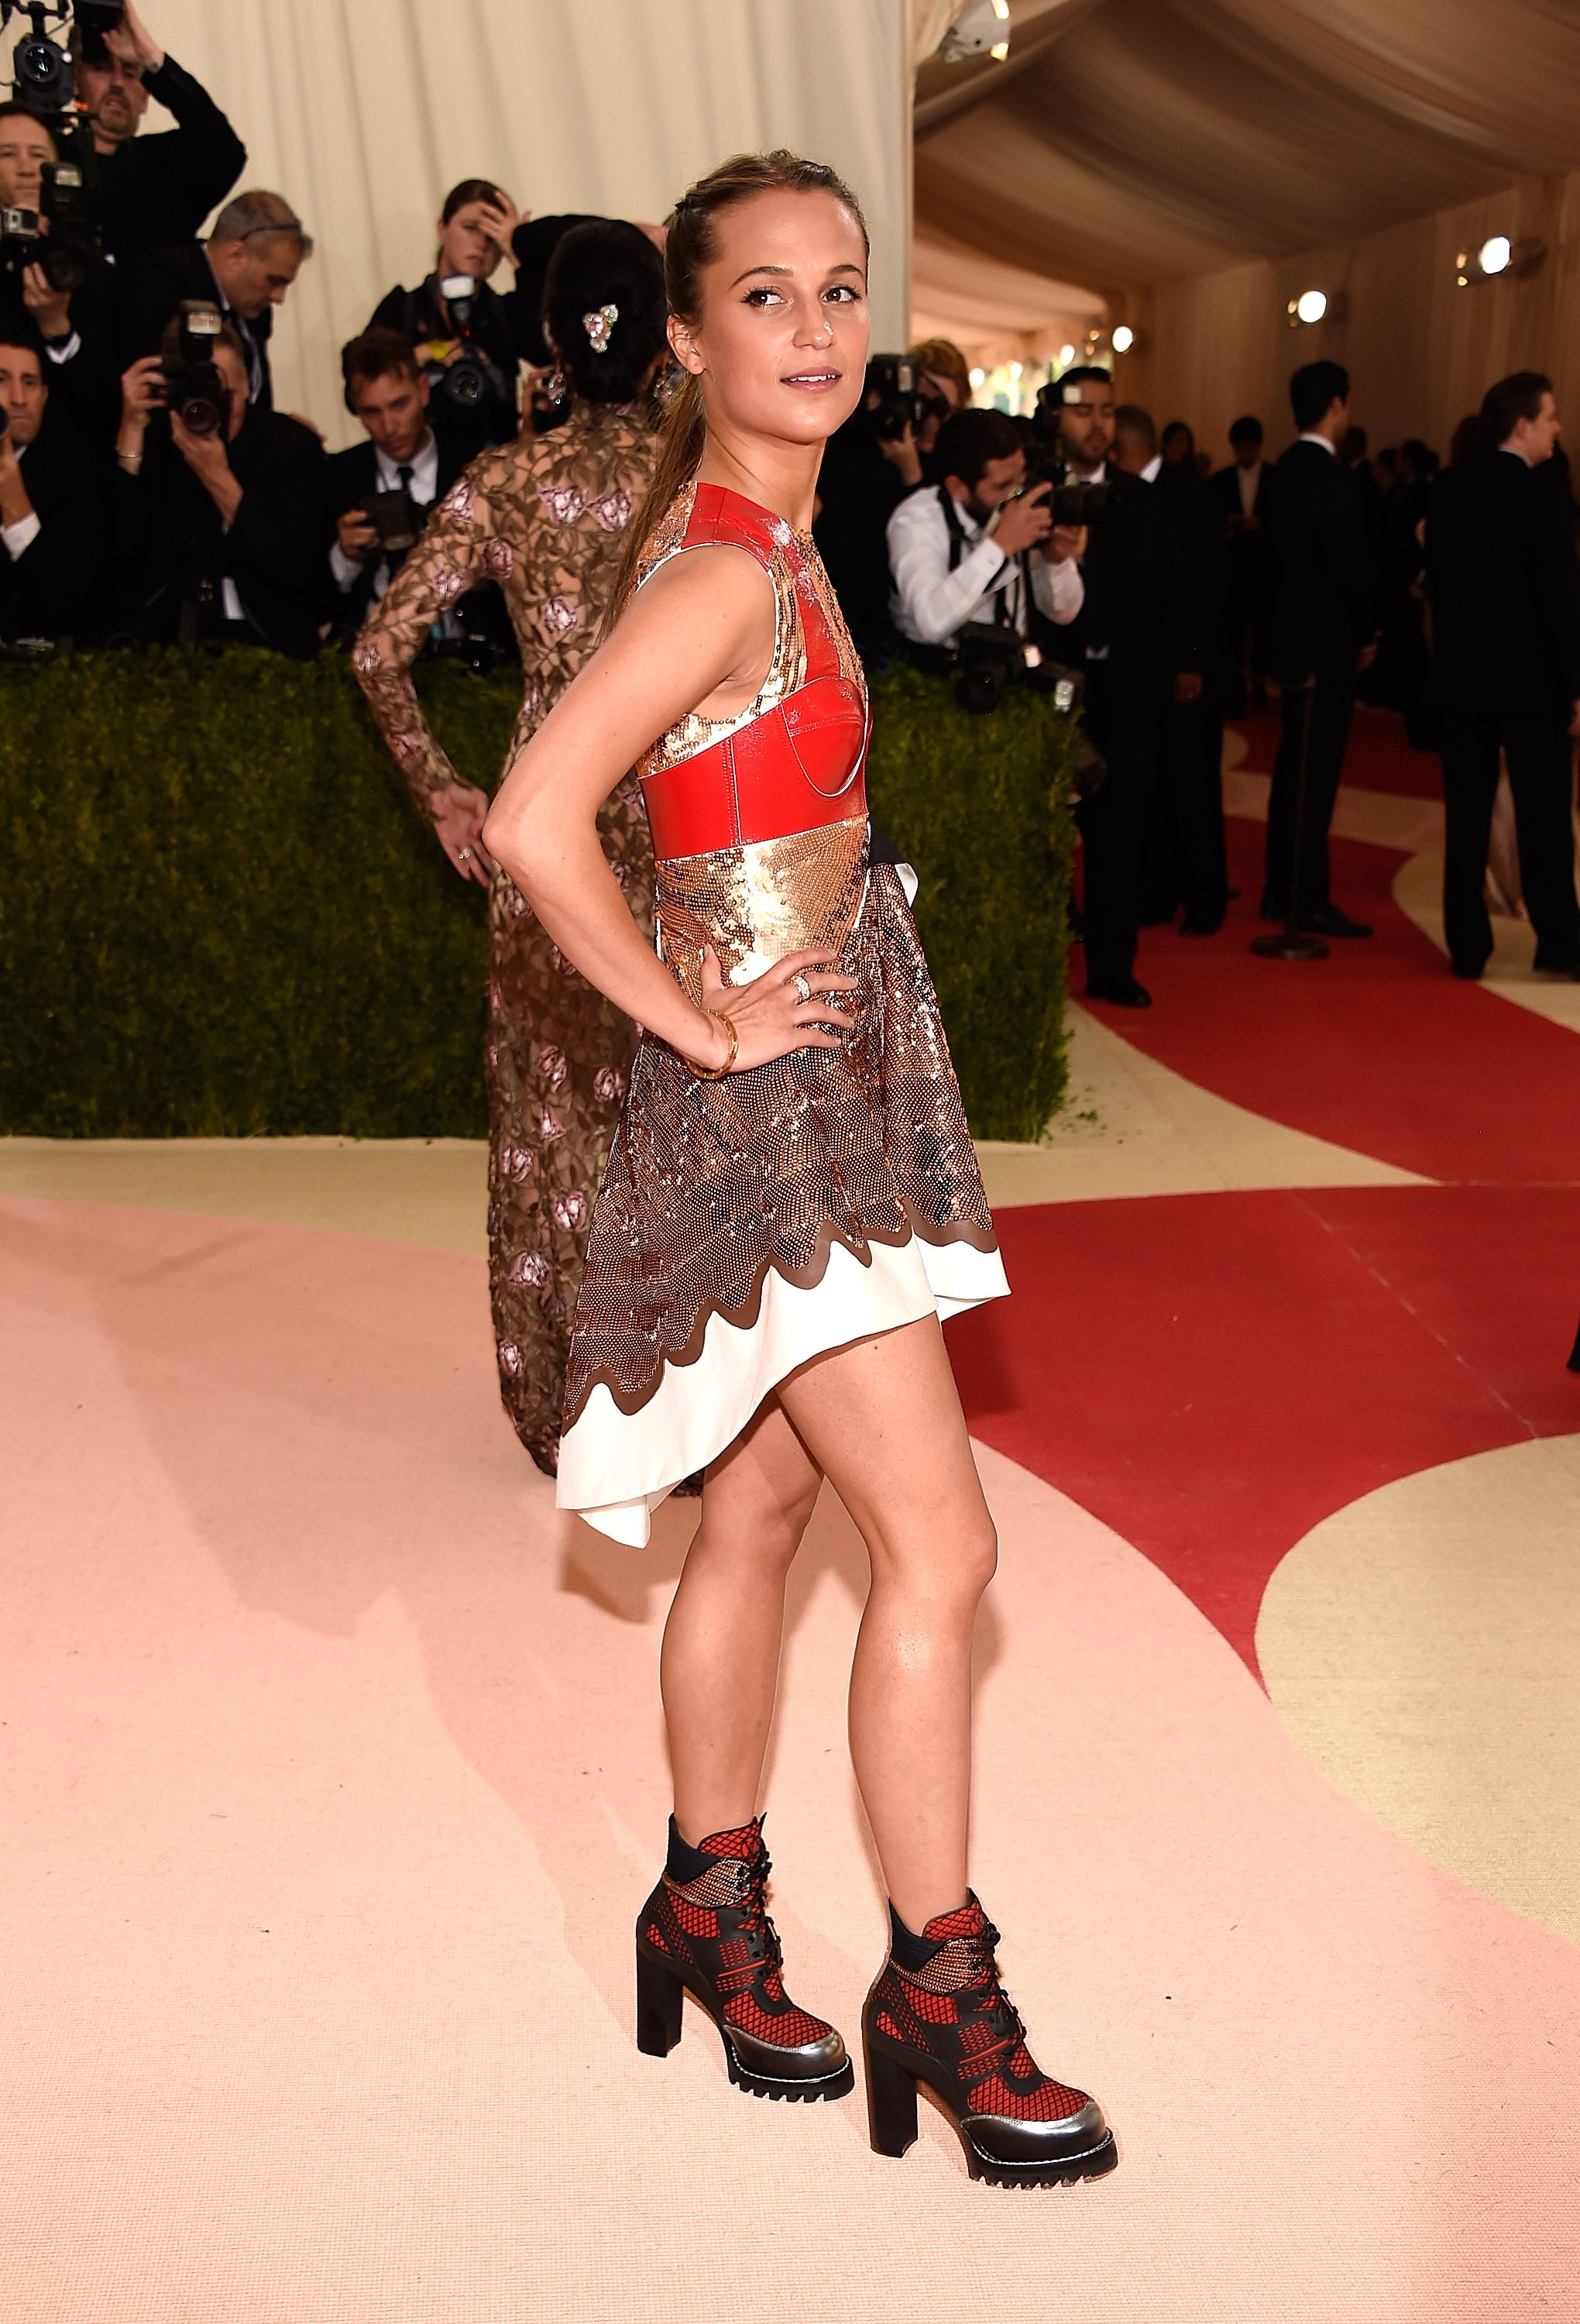 Met Gala 2016: Alicia Vikander Shows A Lot of Leg in Louis Vuitton